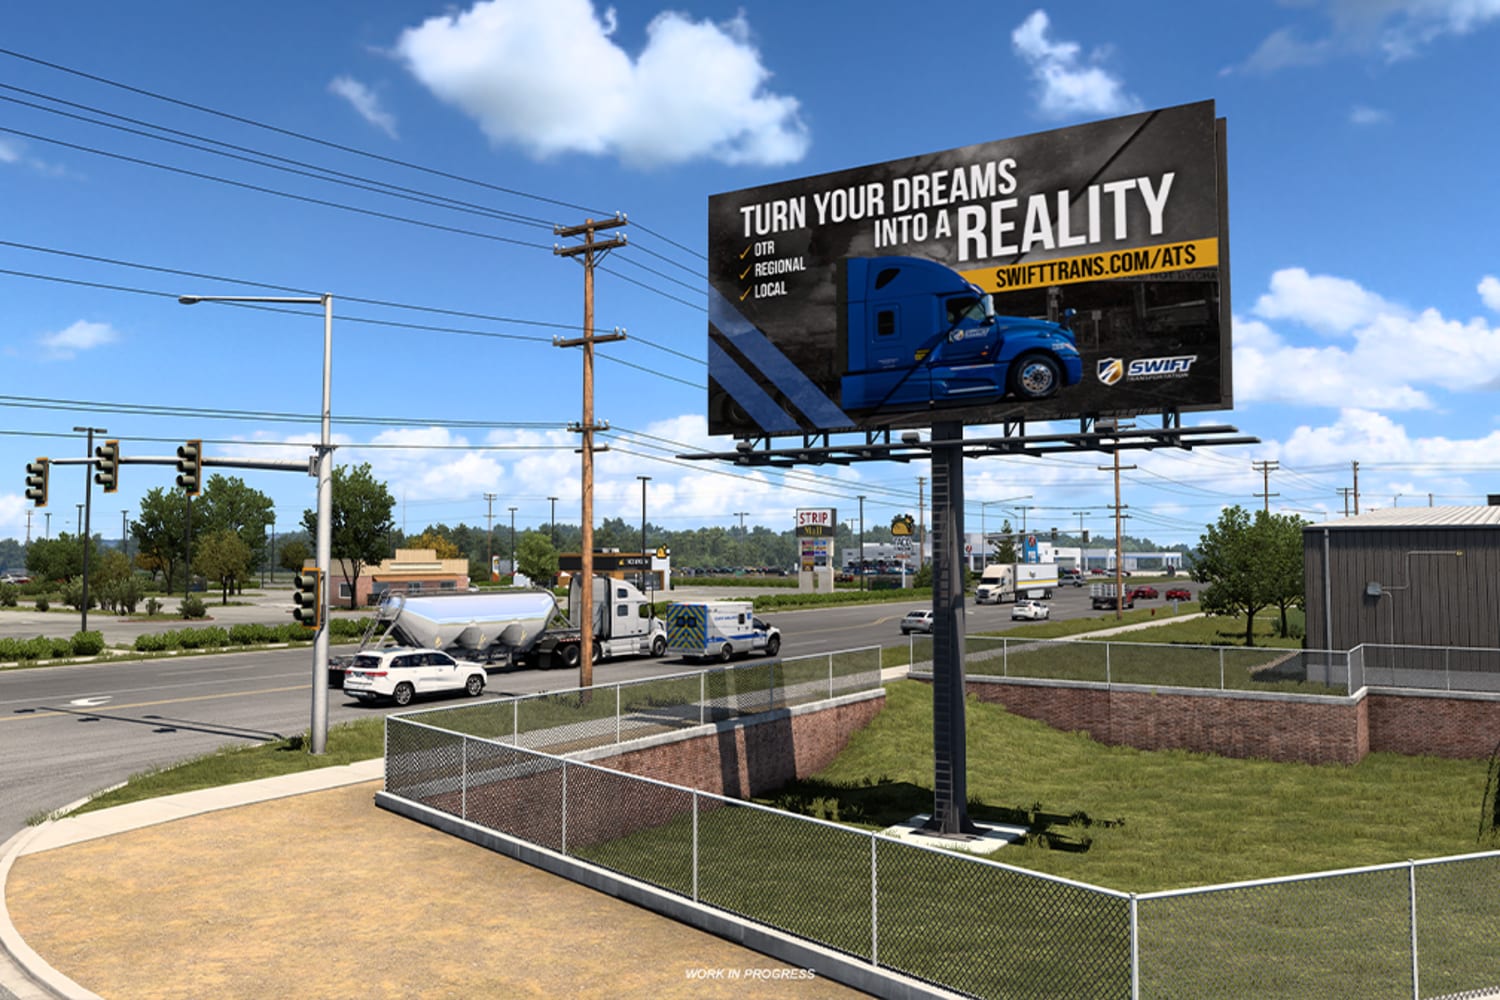 American Truck Simulator is running ads for real truck companies